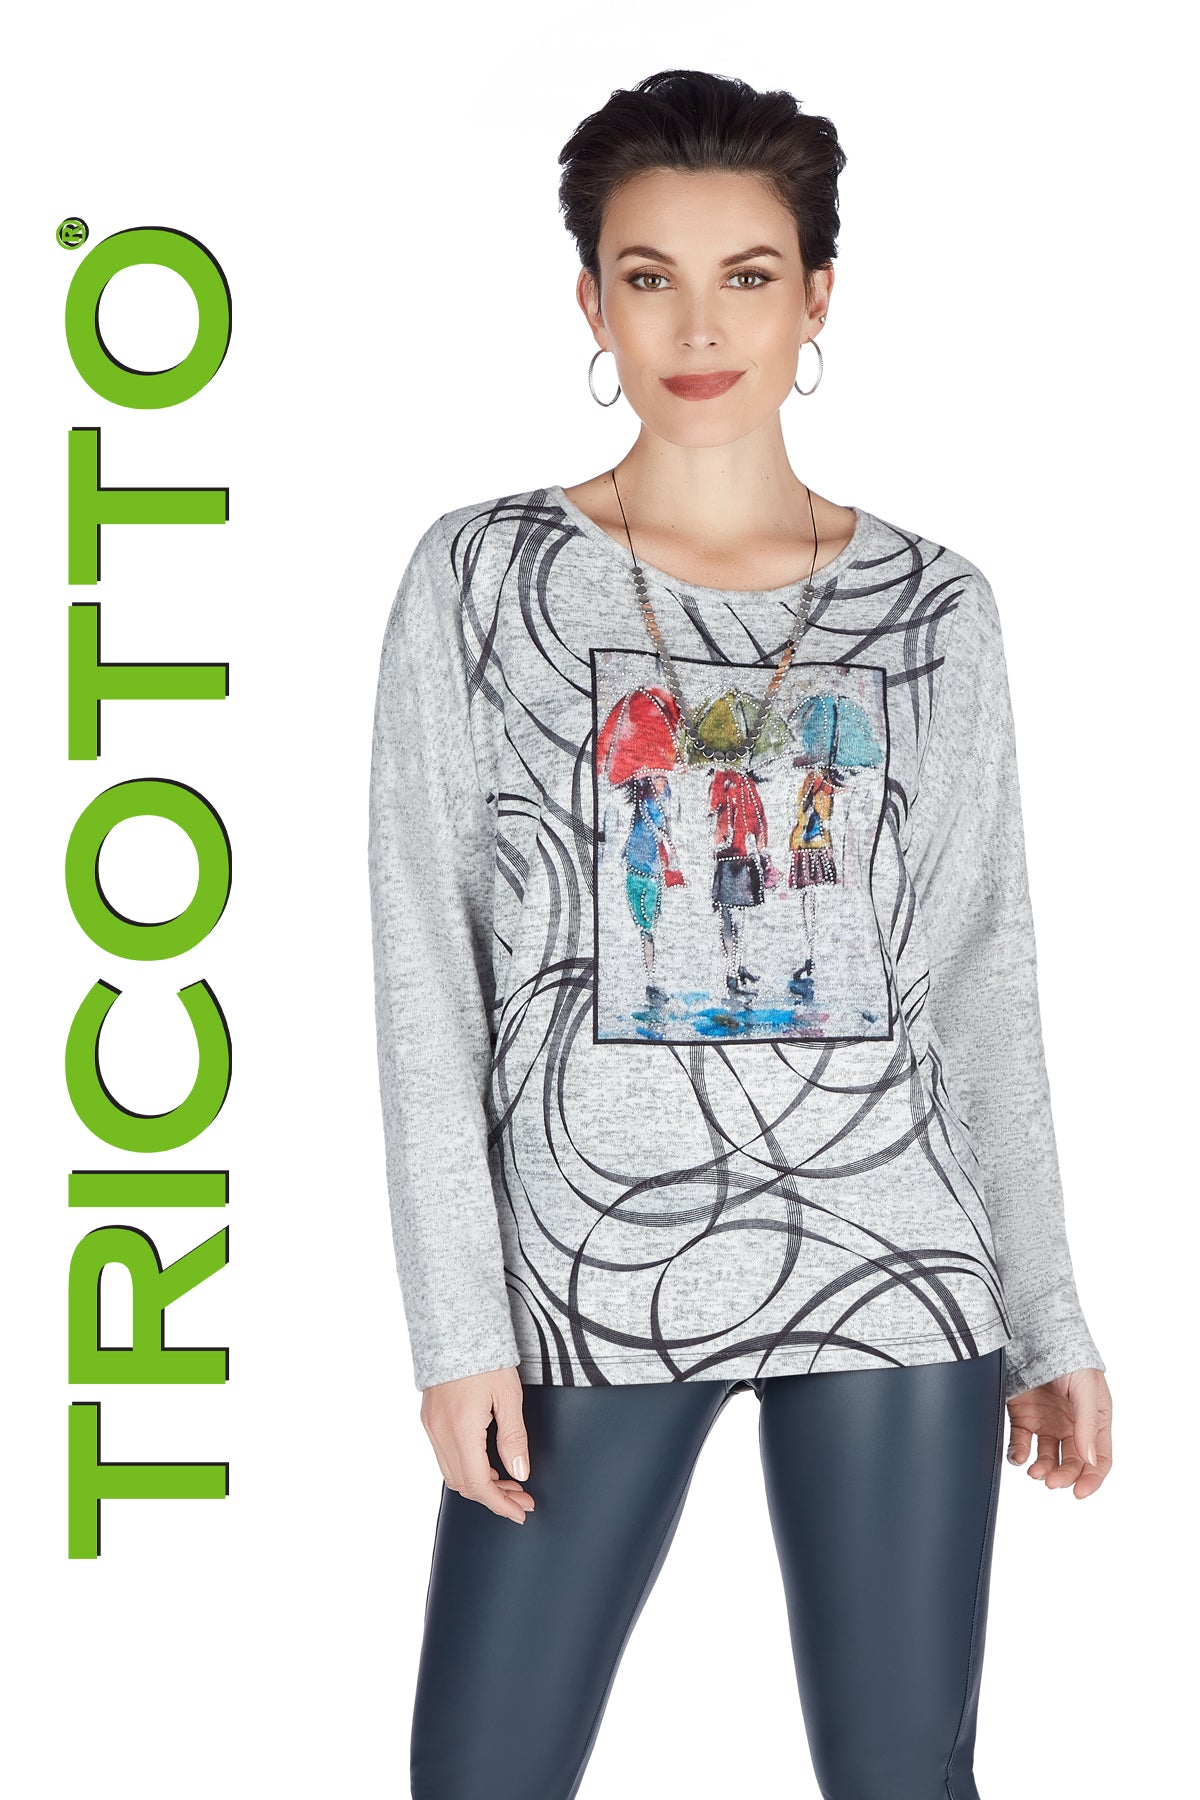 Buy Tricotto Sweaters Online-Tricotto Sweaters-Tricotto Online Shop-Online Sweater Shop-Tricotto Fashion Montreal